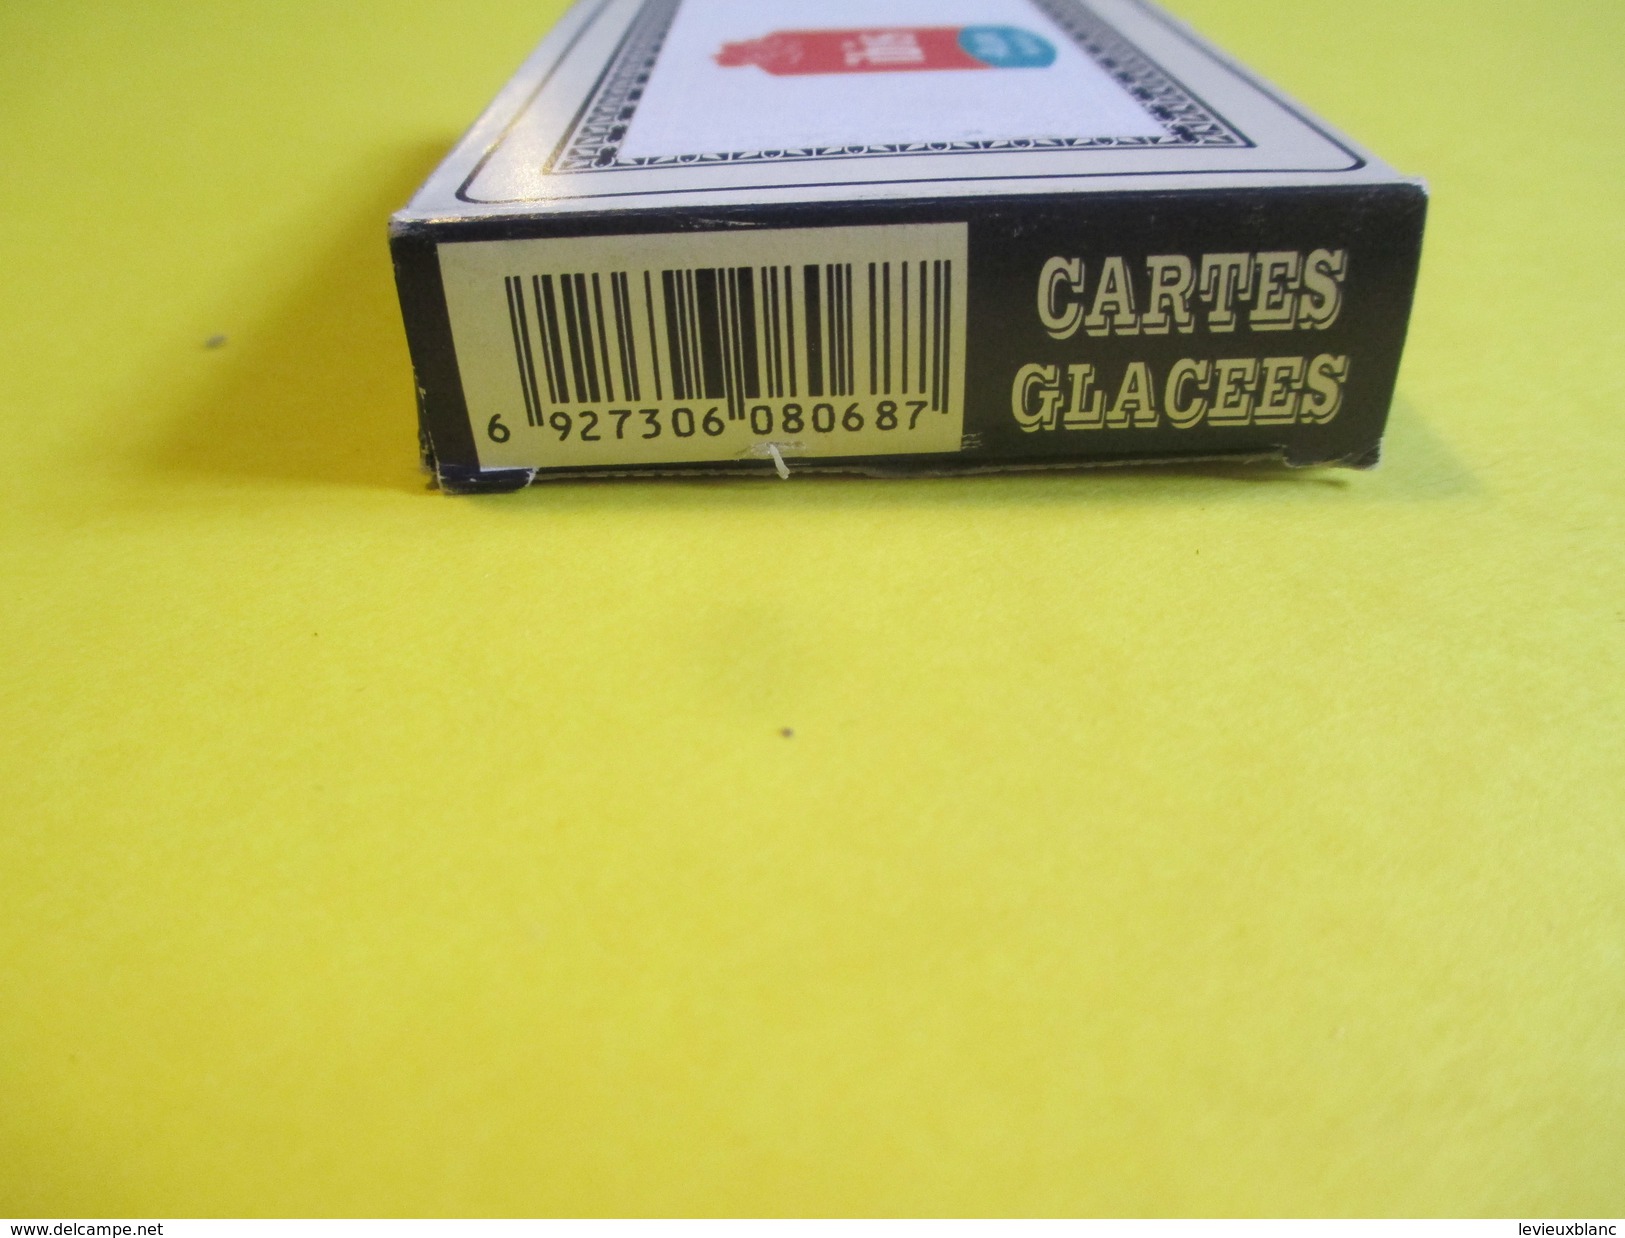 Jeux De 54 Cartes /Publicitaire/Cartes Glacées/ IBIS Accor Hotels / Made In CHINA/vers 2000        CAJ22 - Other & Unclassified